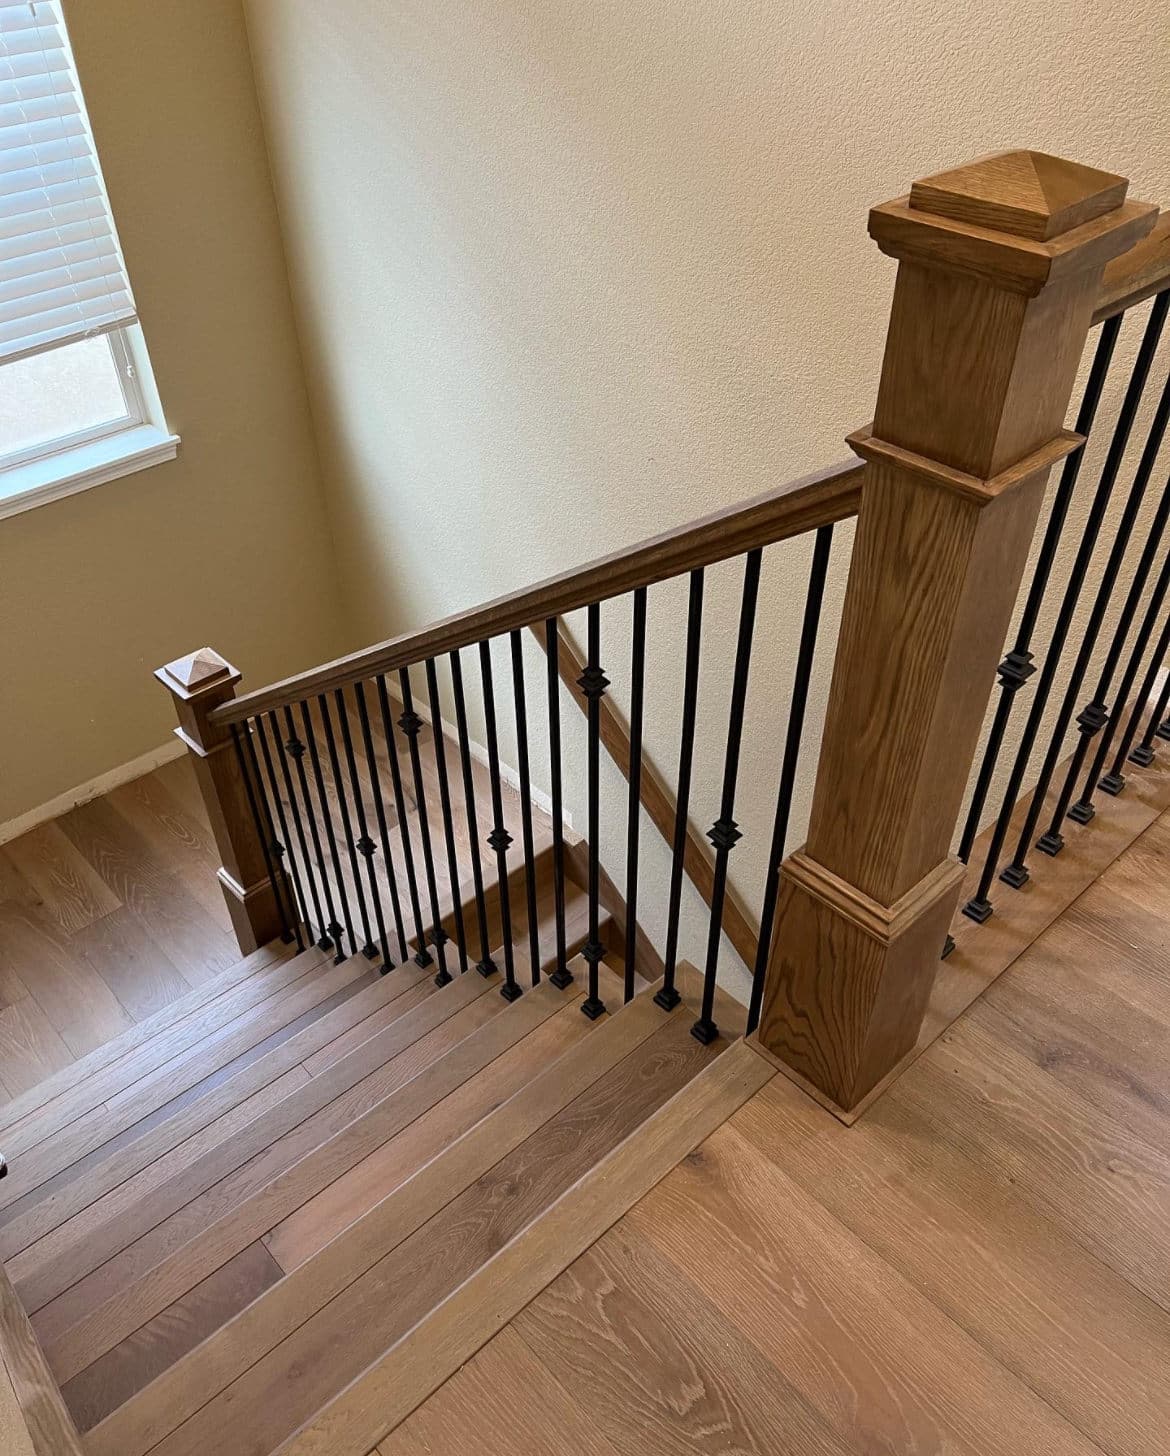 Stair-and-railing-title-pic